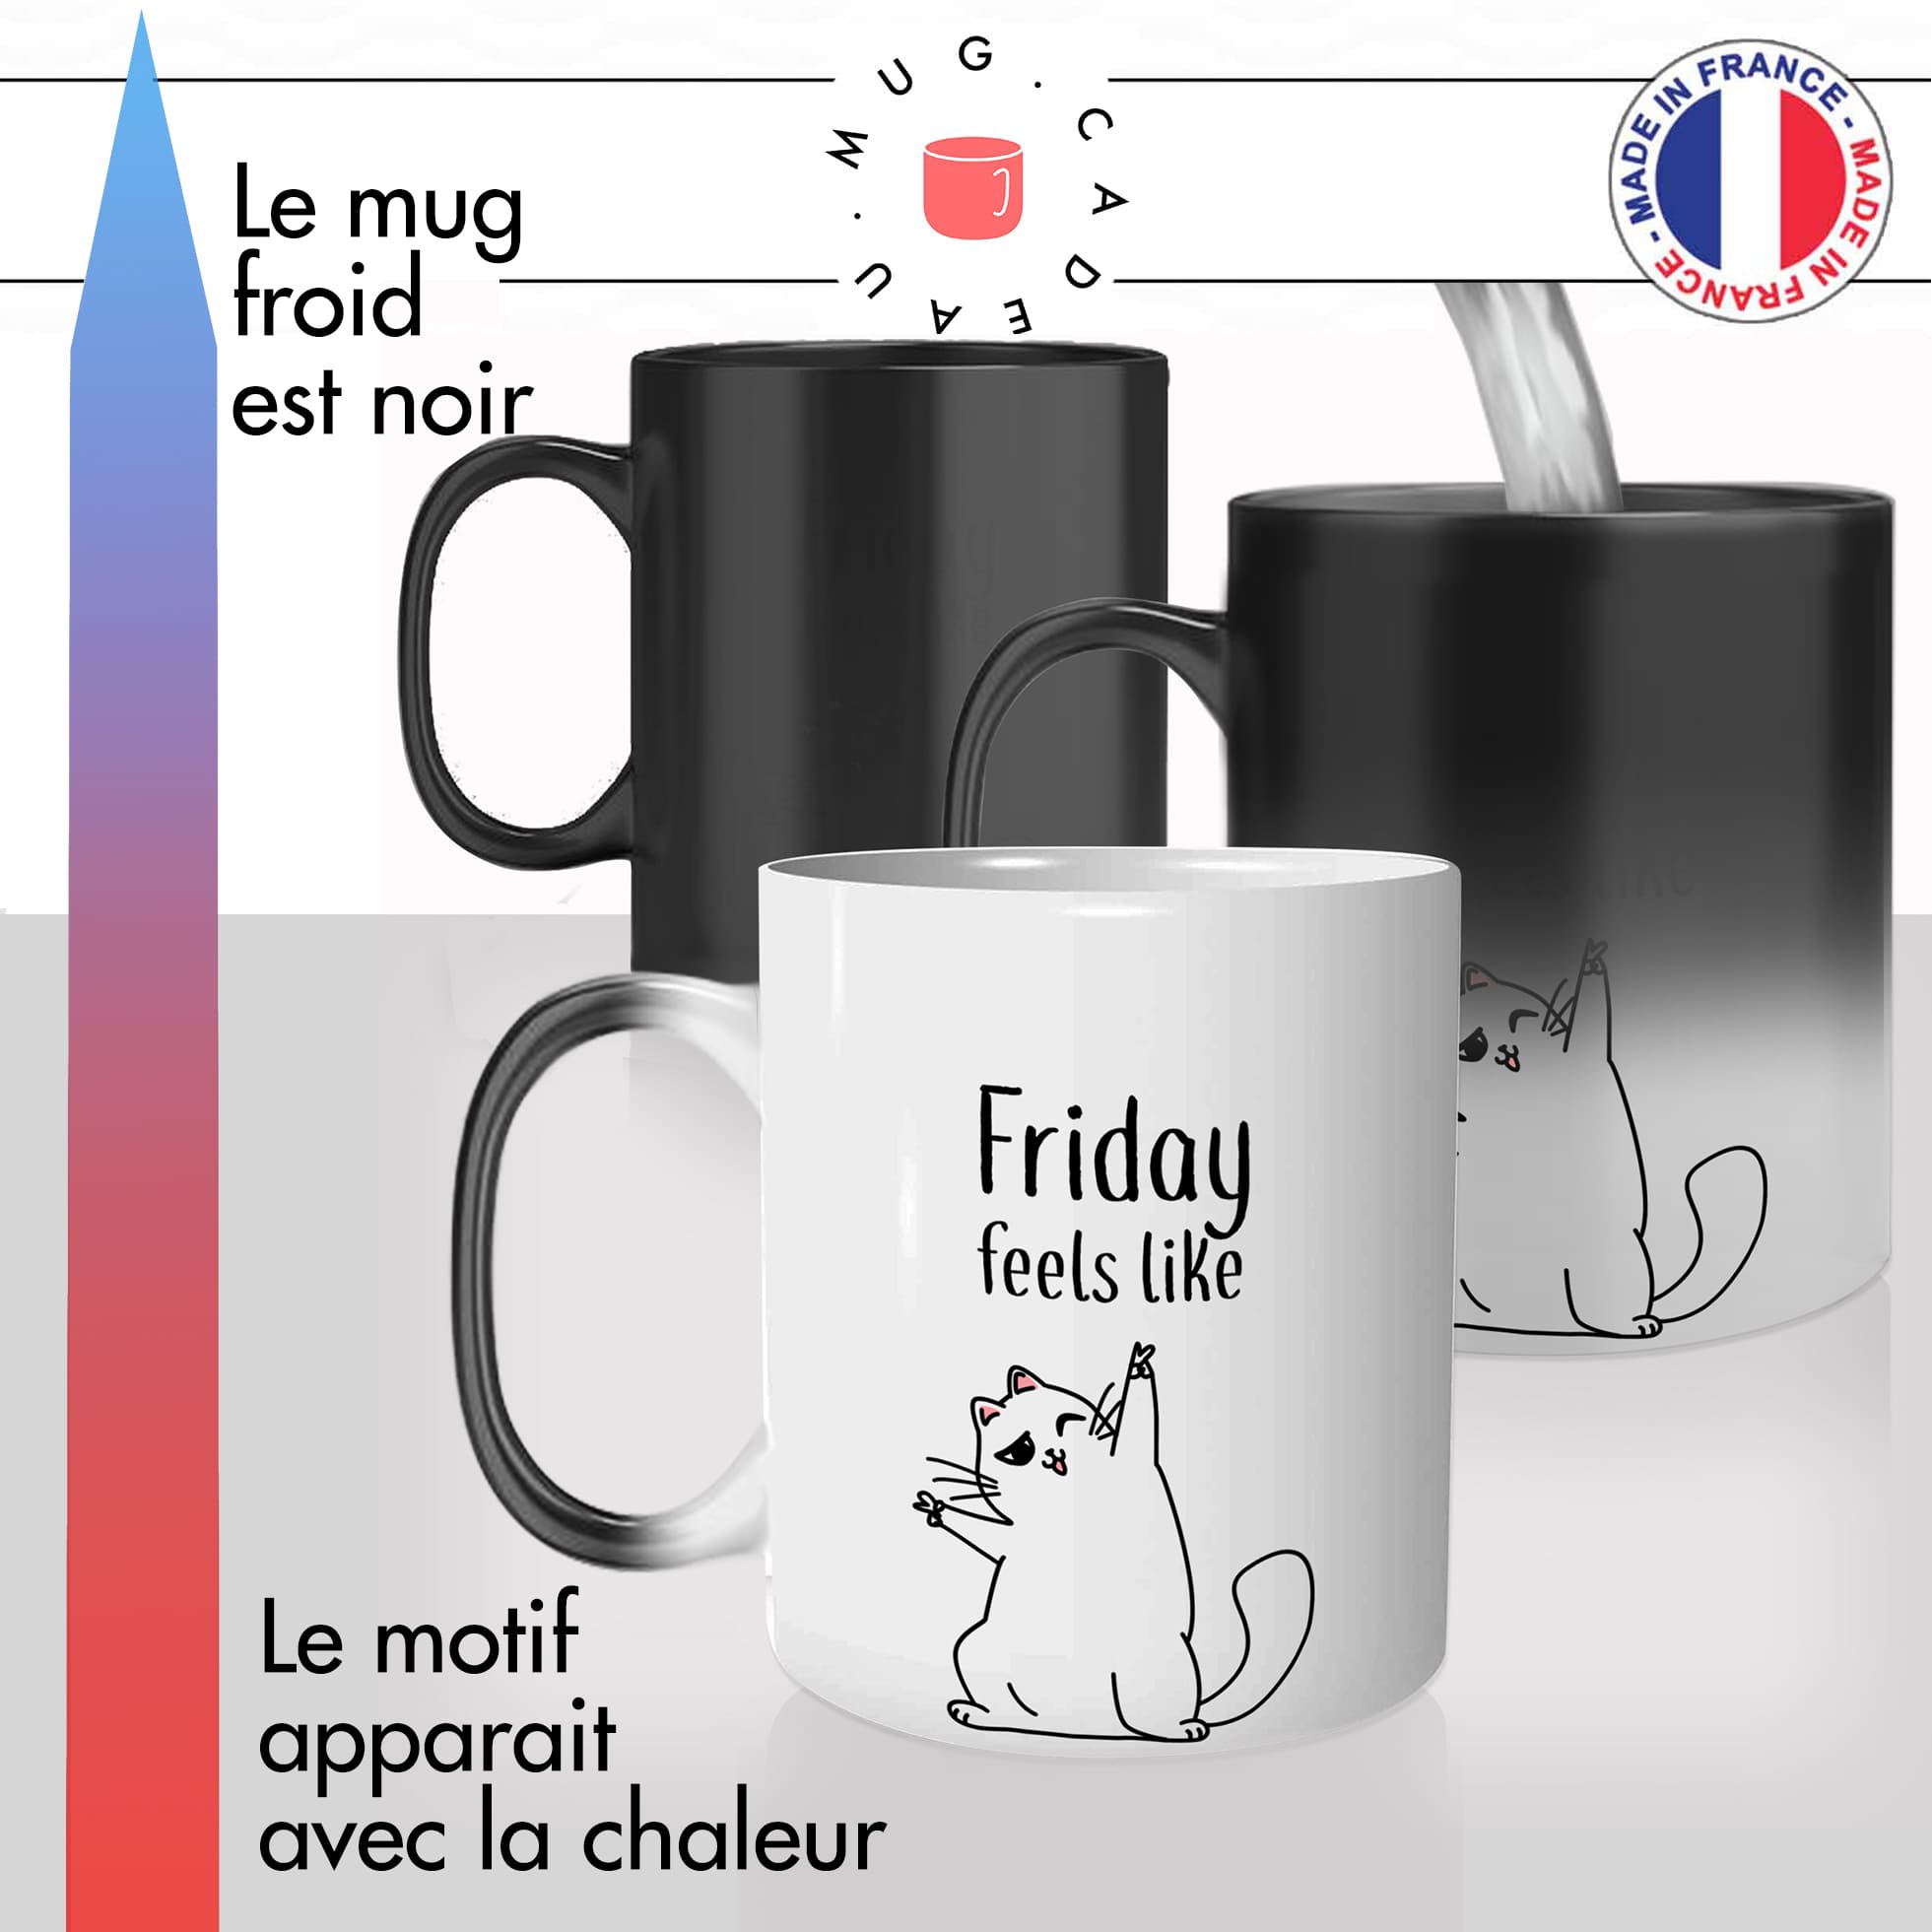 mug magique thermoreactif thermo chauffant chat friday feels like vendredi week end chaton mignon idée cadeau